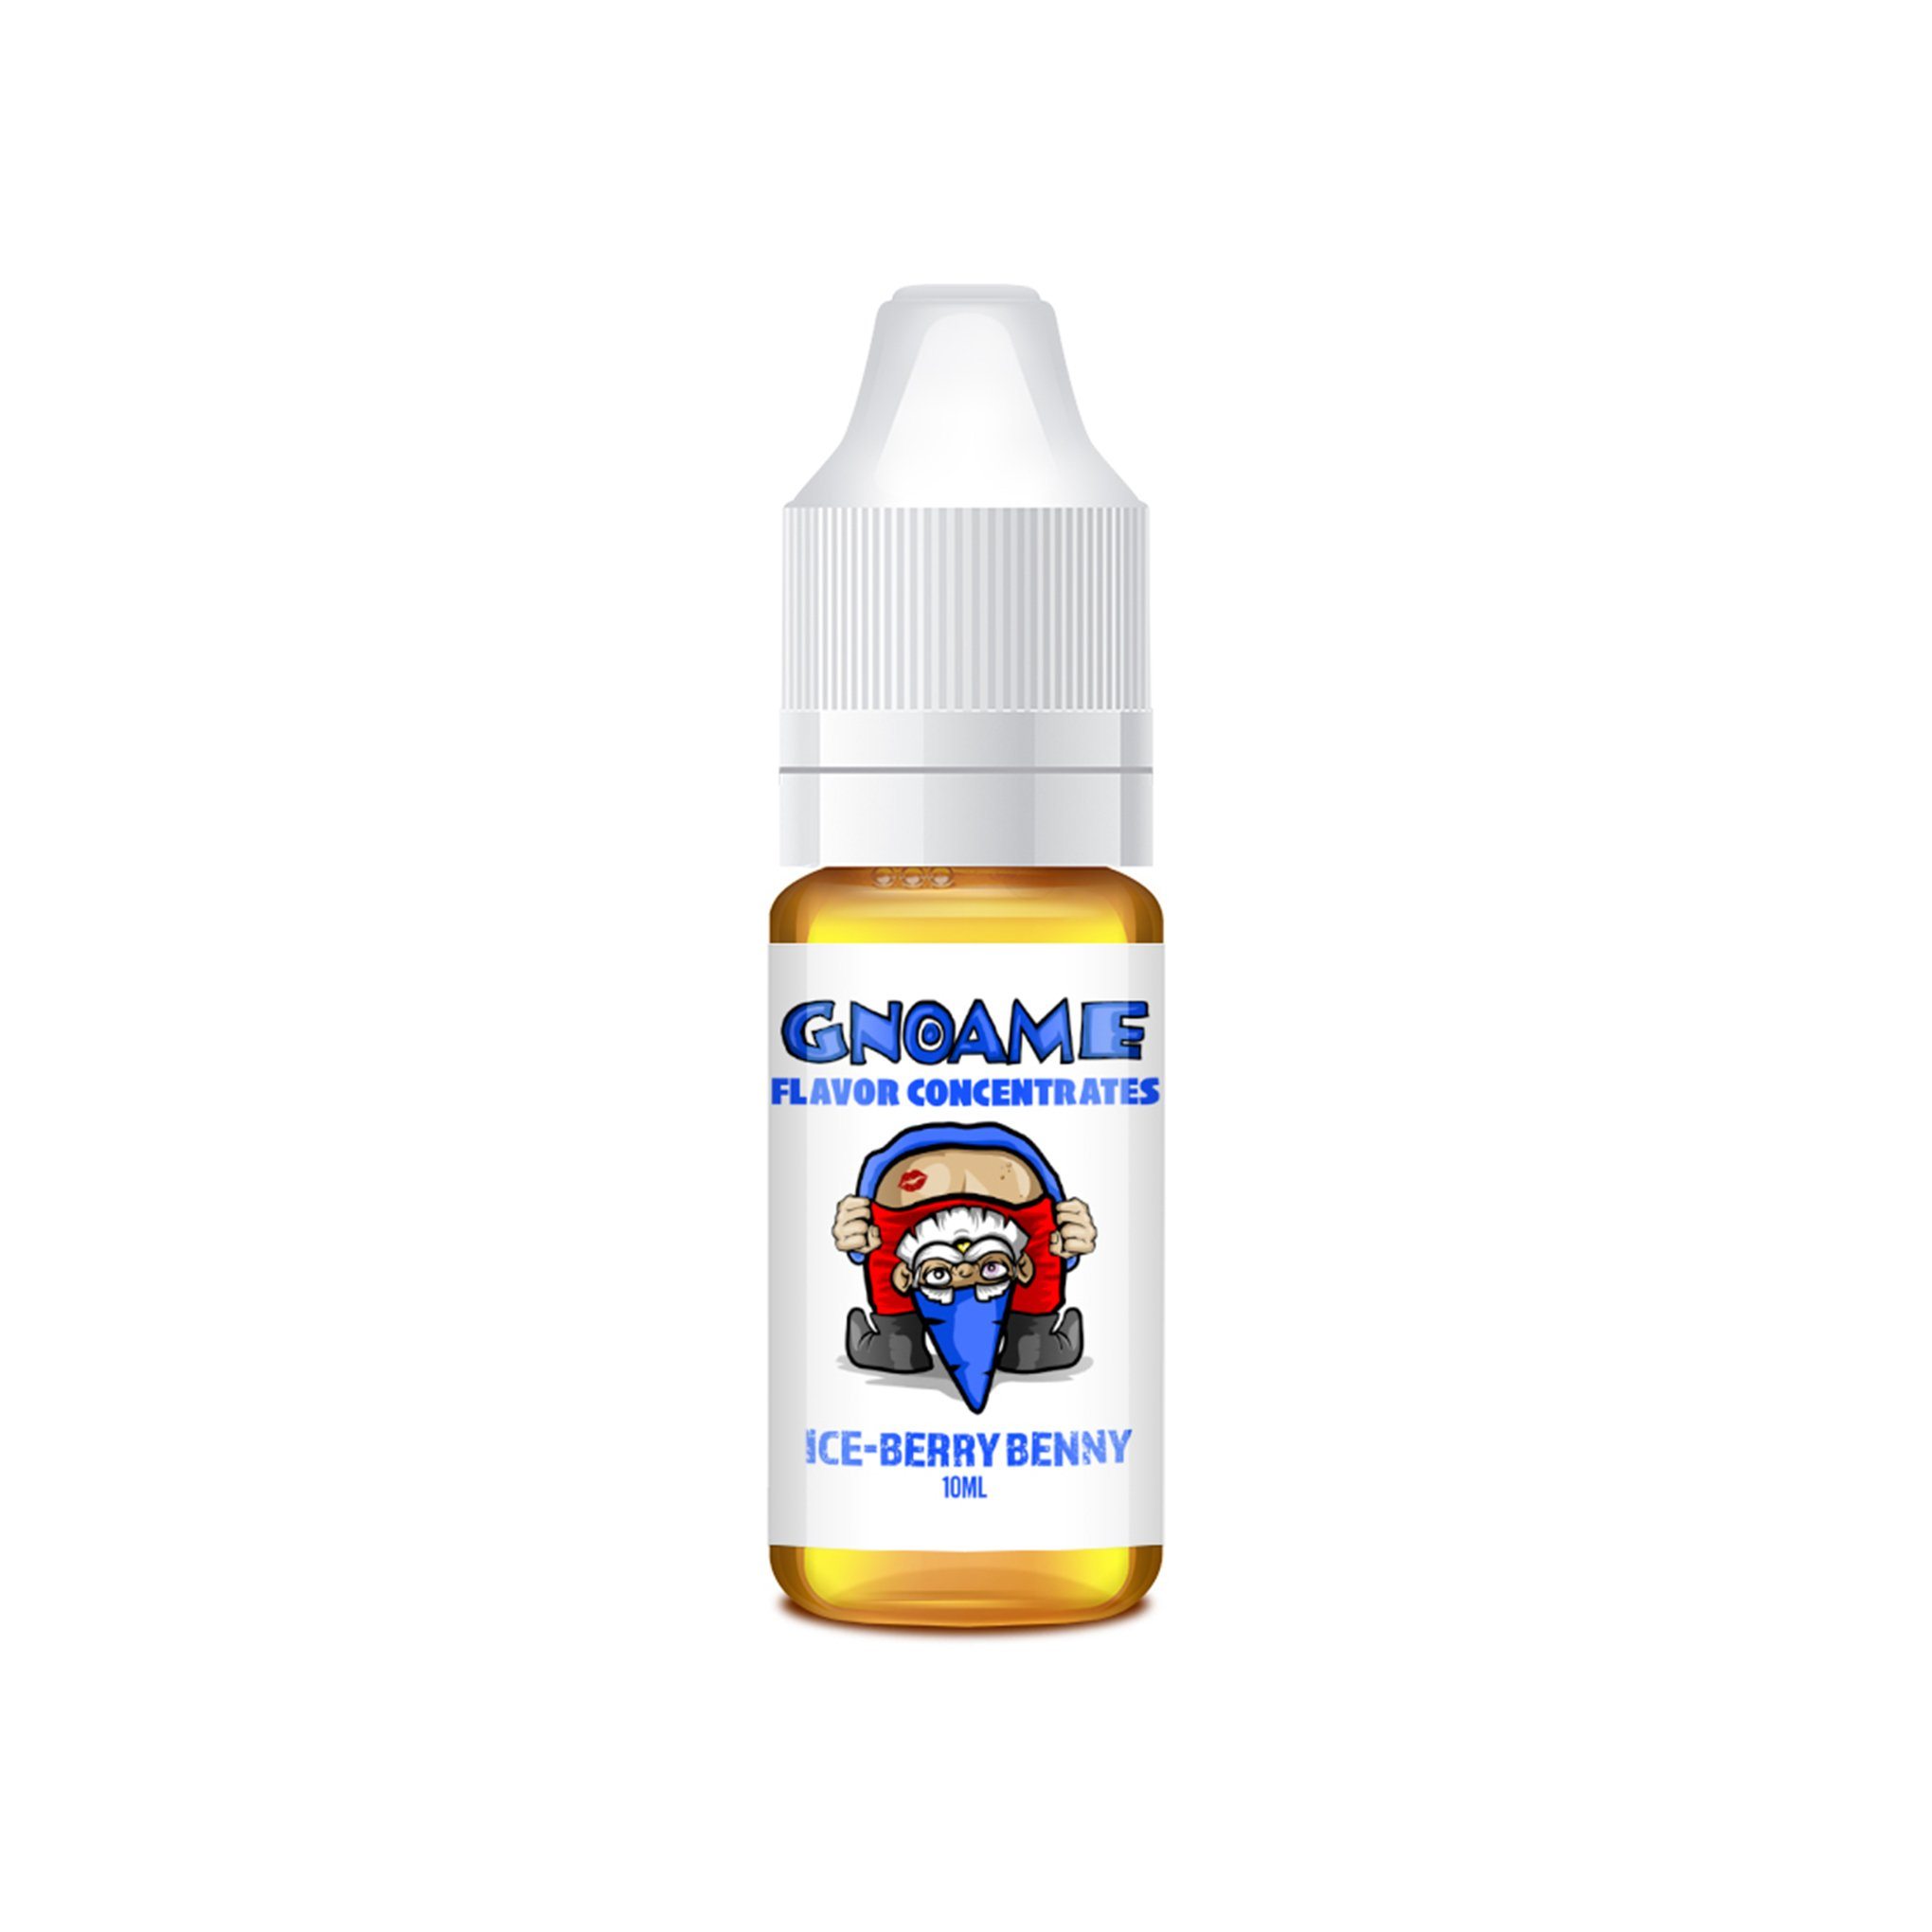 Gnoame Concentrates Ice-Berry Benny